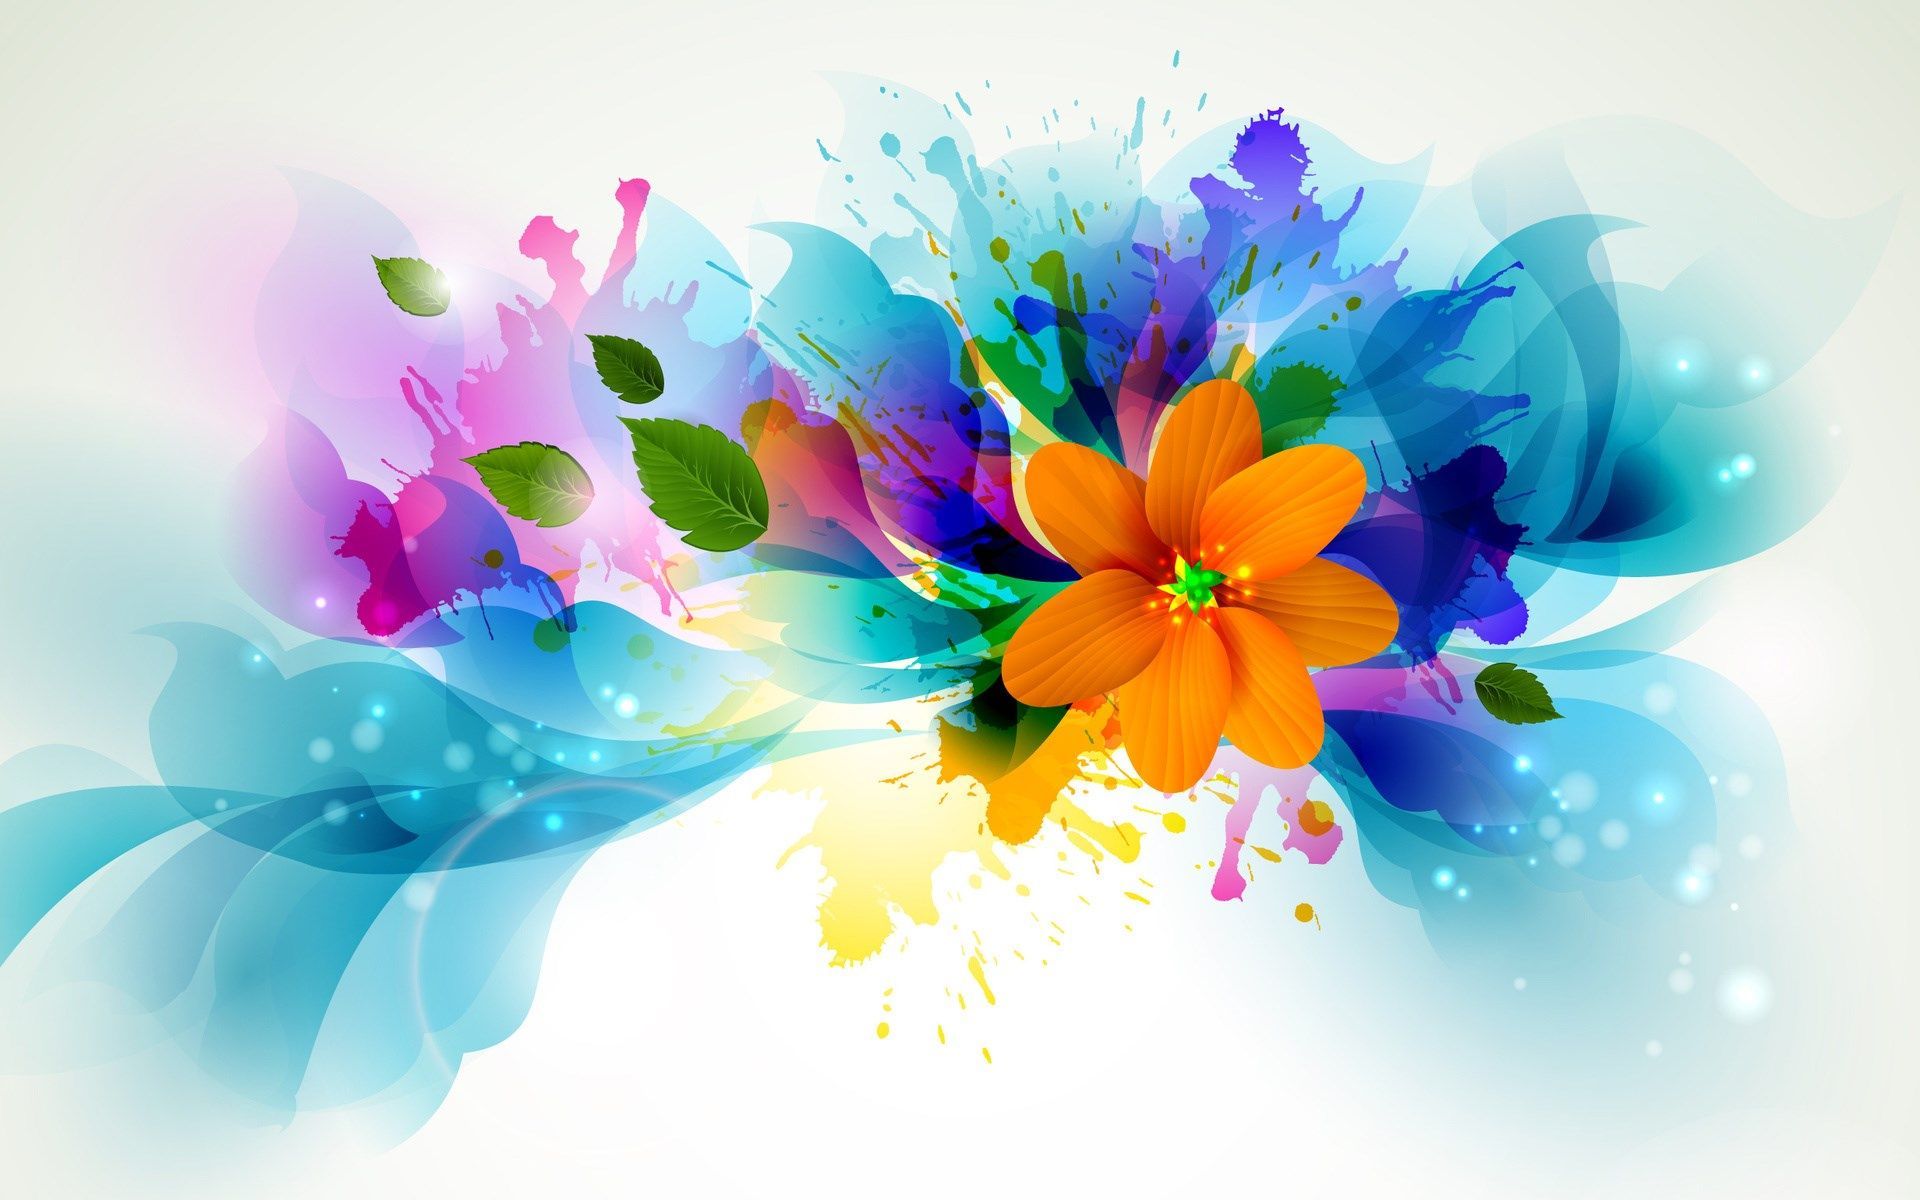 Bright Colorful Abstract Wallpapers